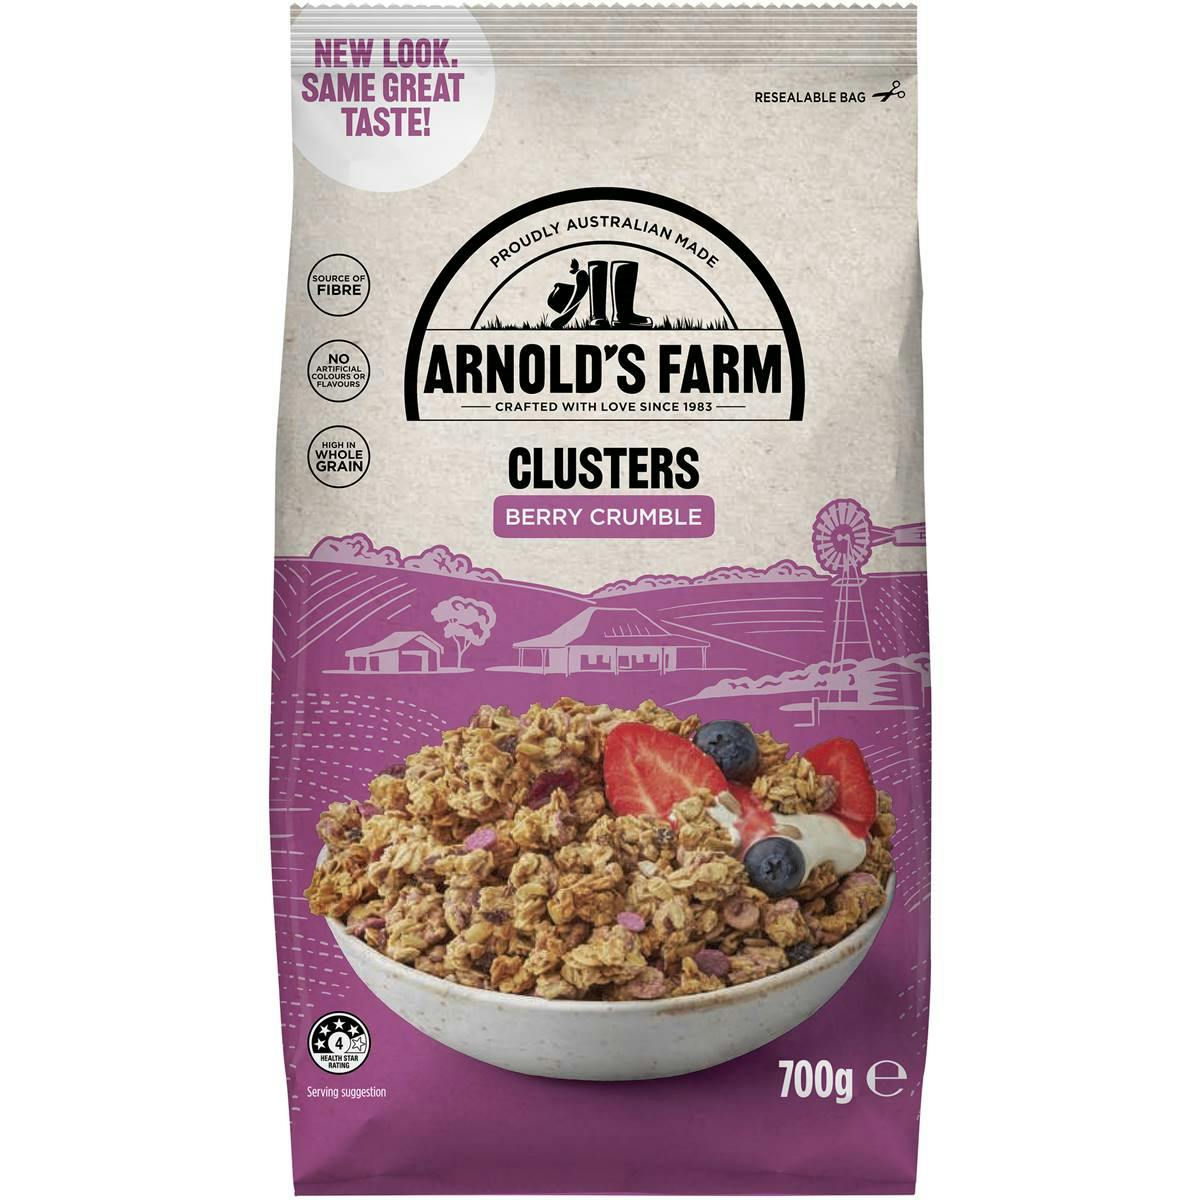 Arnold's Farm Berry Crumble Clusters 700g